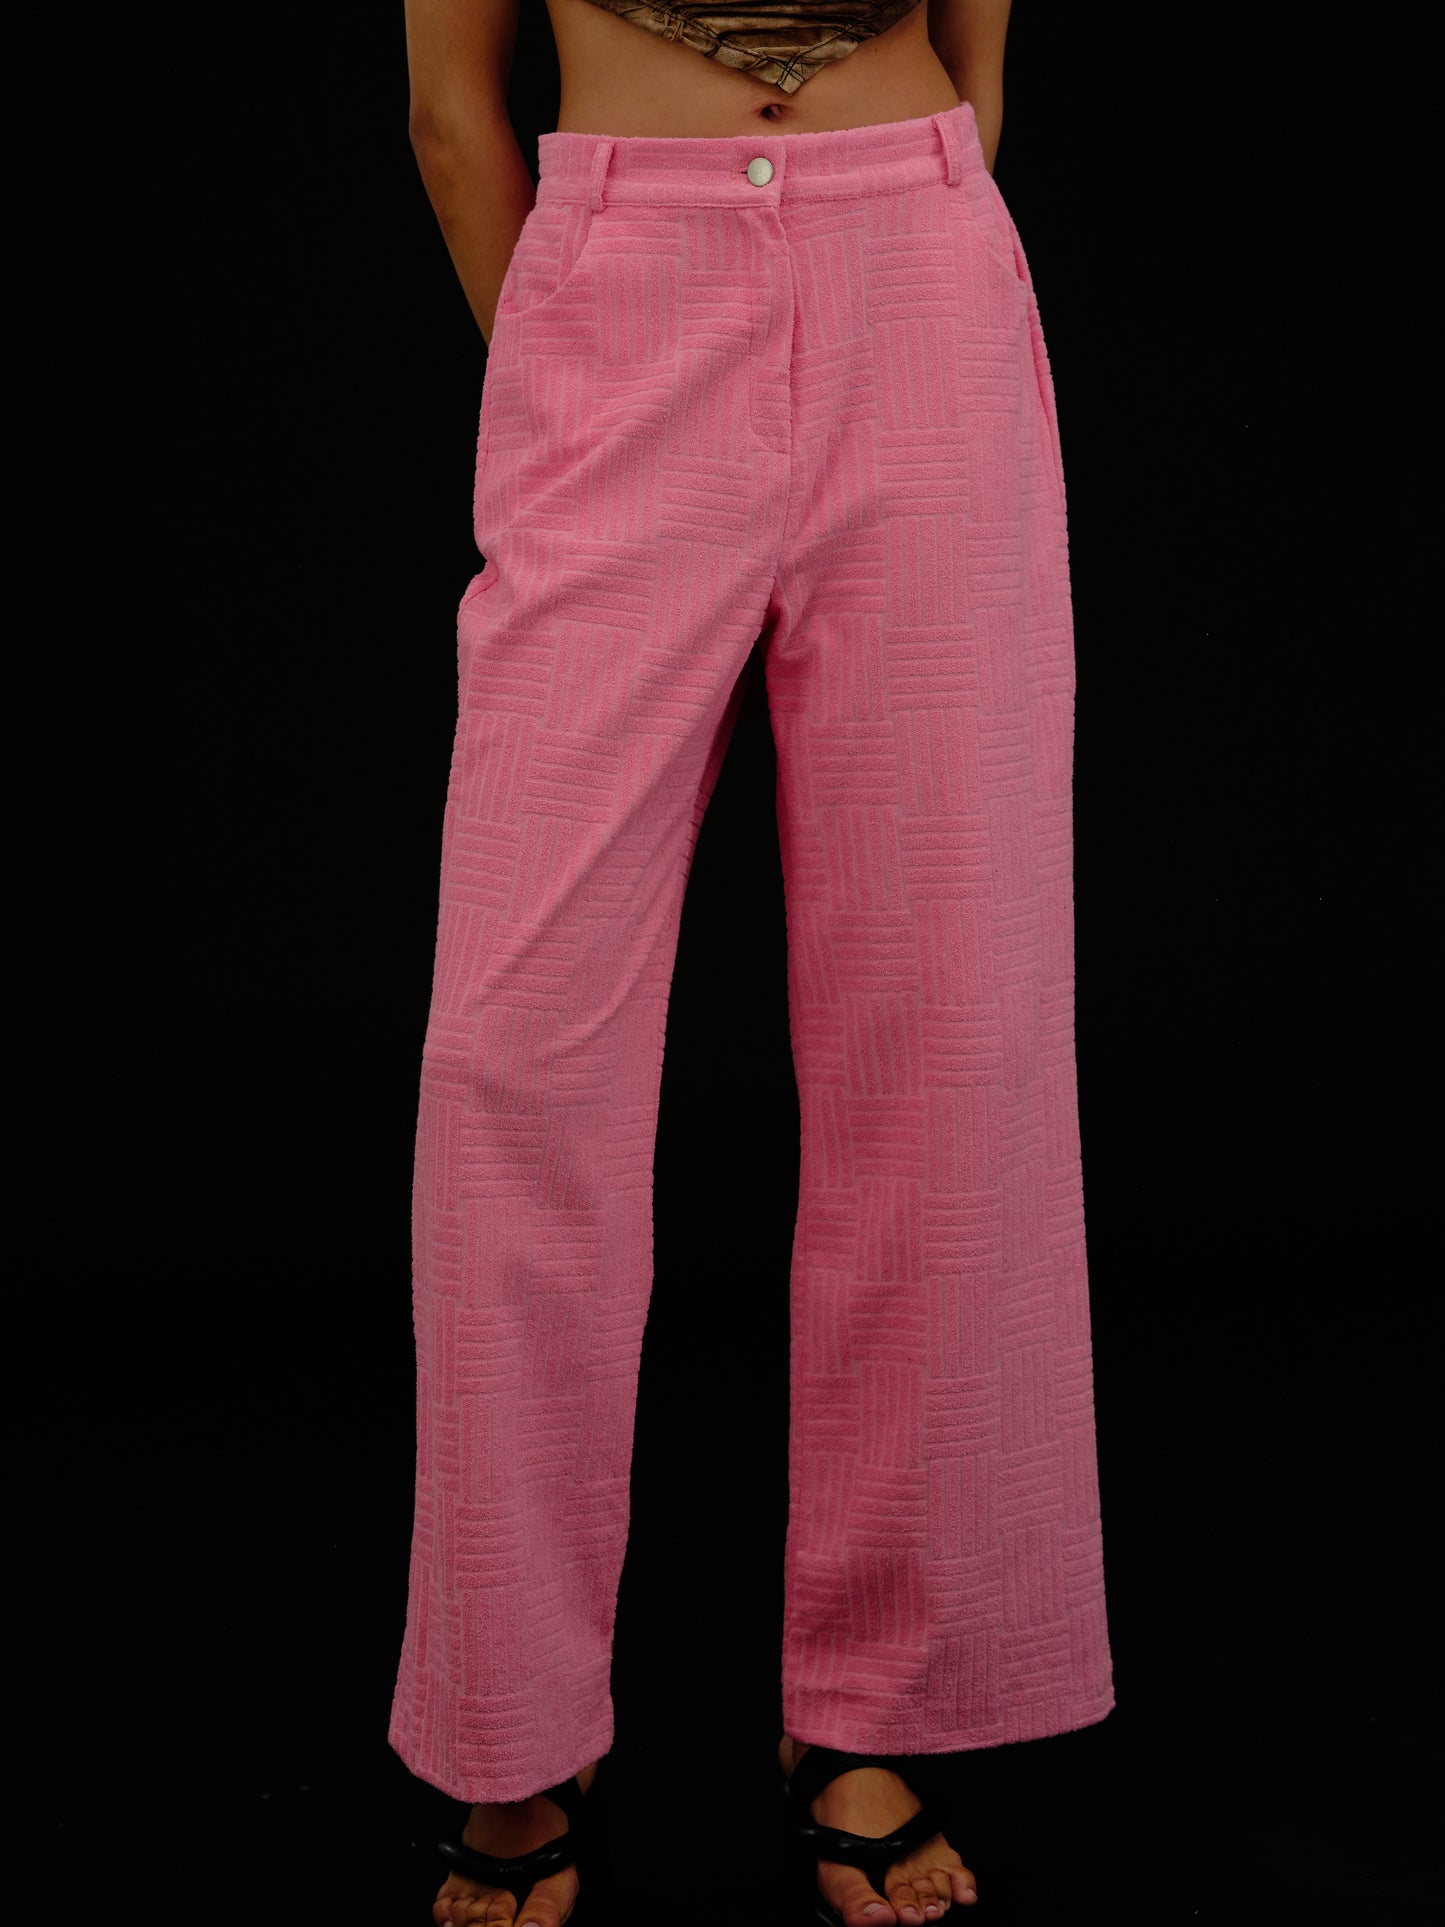 Toweling Trousers, Cherry Blossom